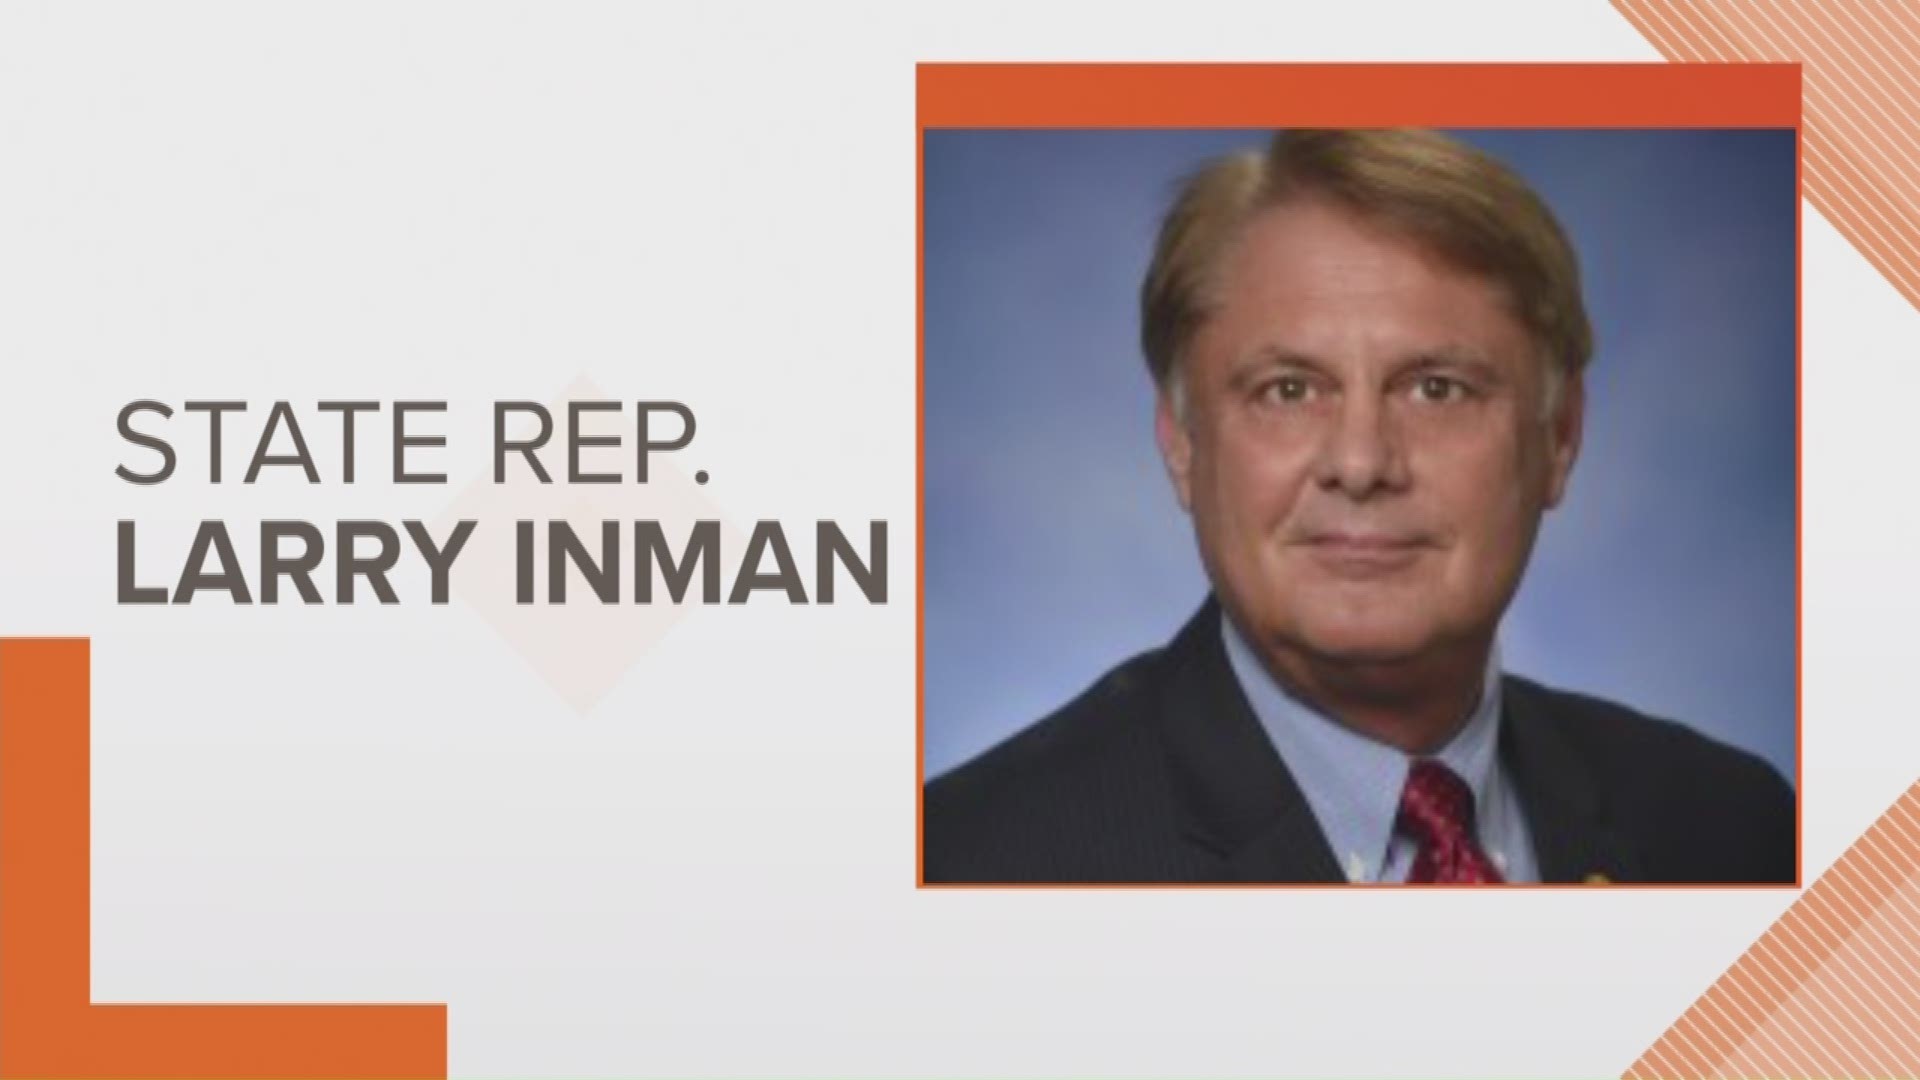 Democrats and the mayor of Traverse City are launching a campaign to force the resignation of state Rep. Larry Inman, who was charged in an alleged scheme to trade votes for campaign money.